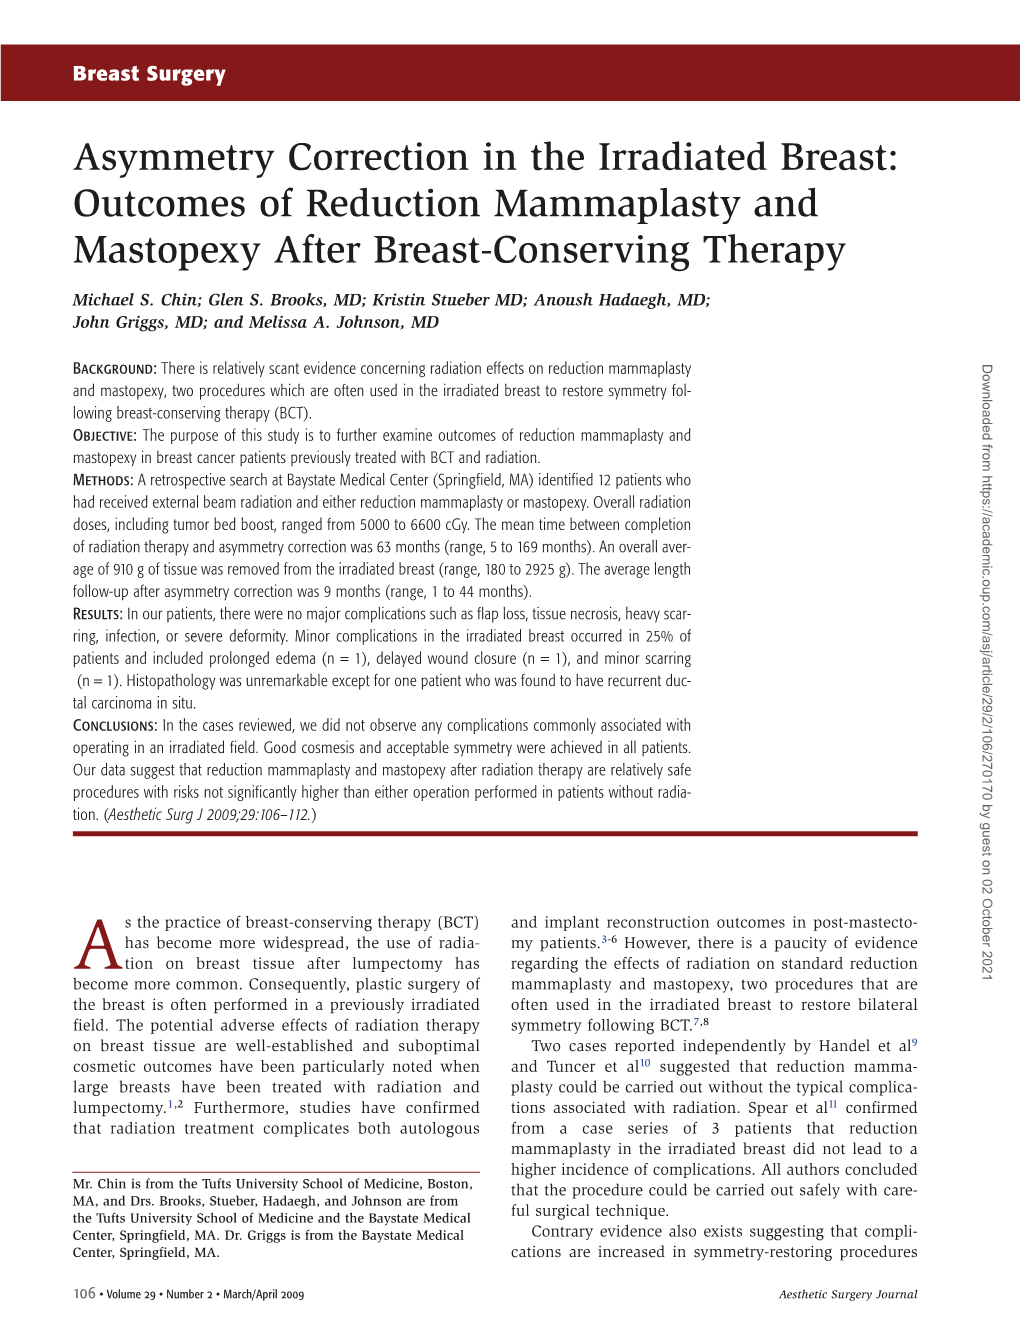 Asymmetry Correction in the Irradiated Breast: Outcomes of Reduction Mammaplasty and Mastopexy After Breast-Conserving Therapy